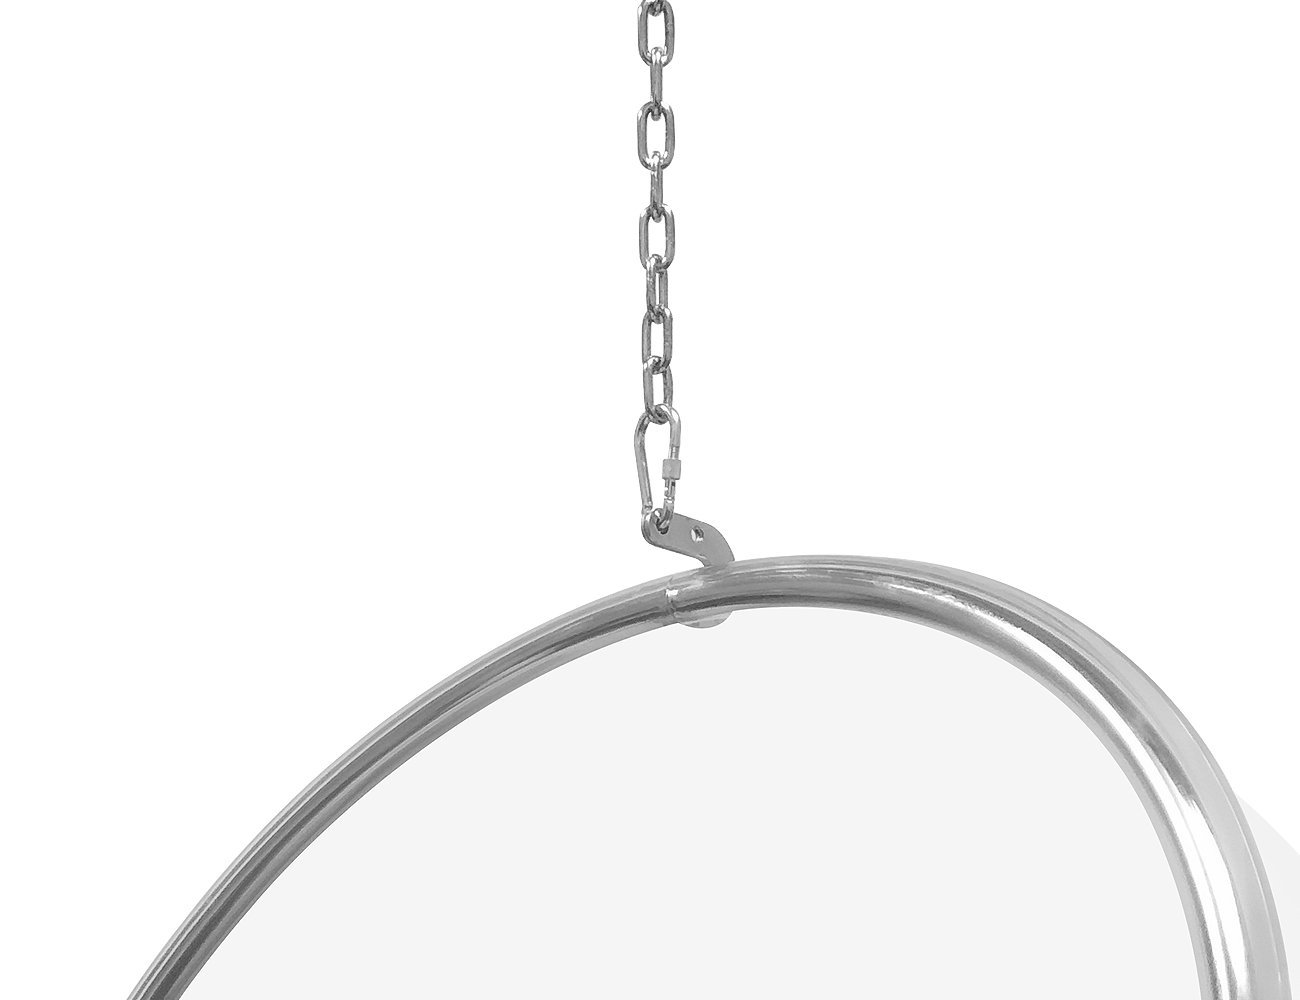 Bubble Hanging Chair @ Crazy Sales - We have the best daily deals online!